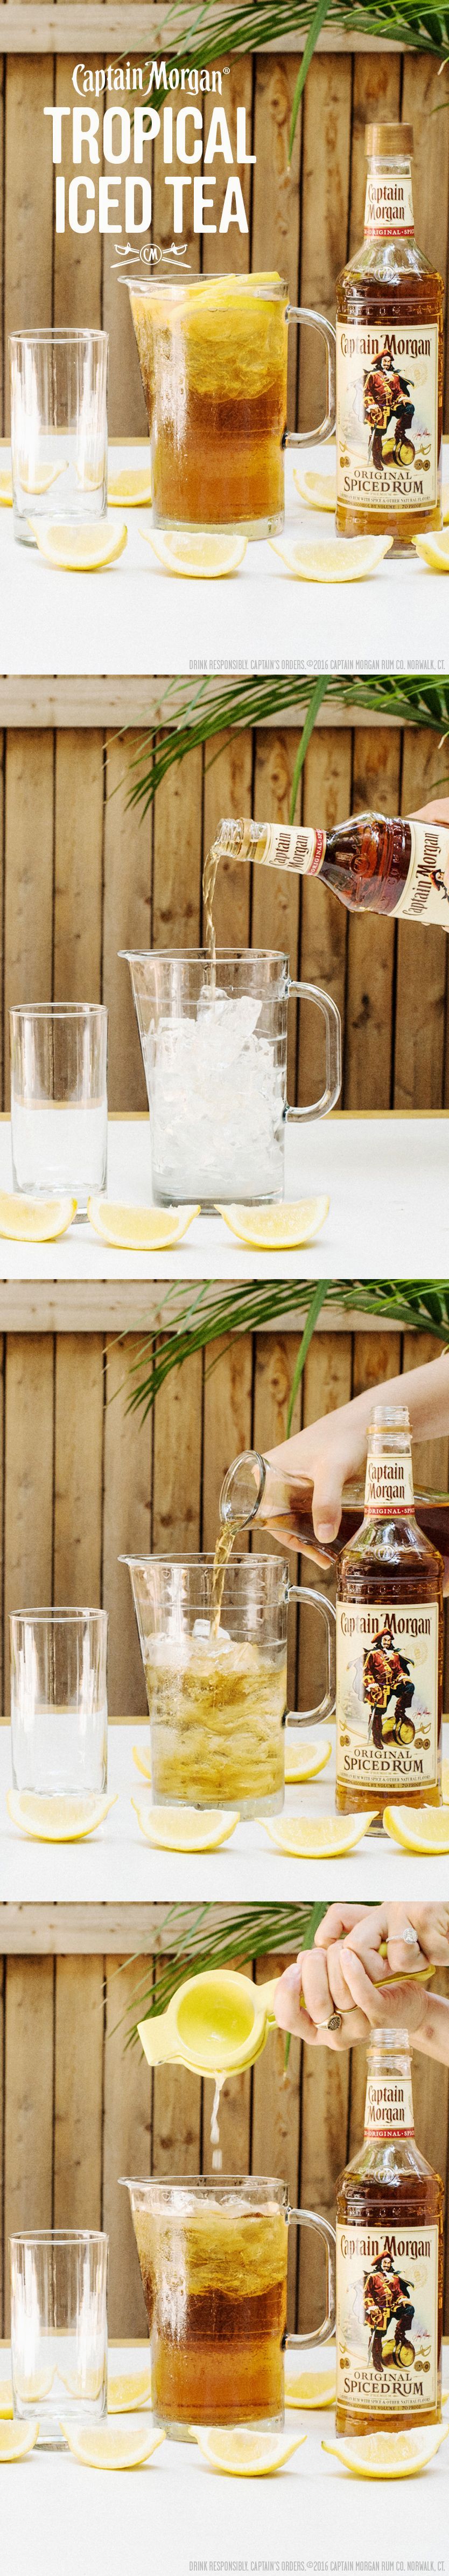 Impress your BBQ guests with this Tropical Iced Tea recipe: 1.5 oz Captain Morgan